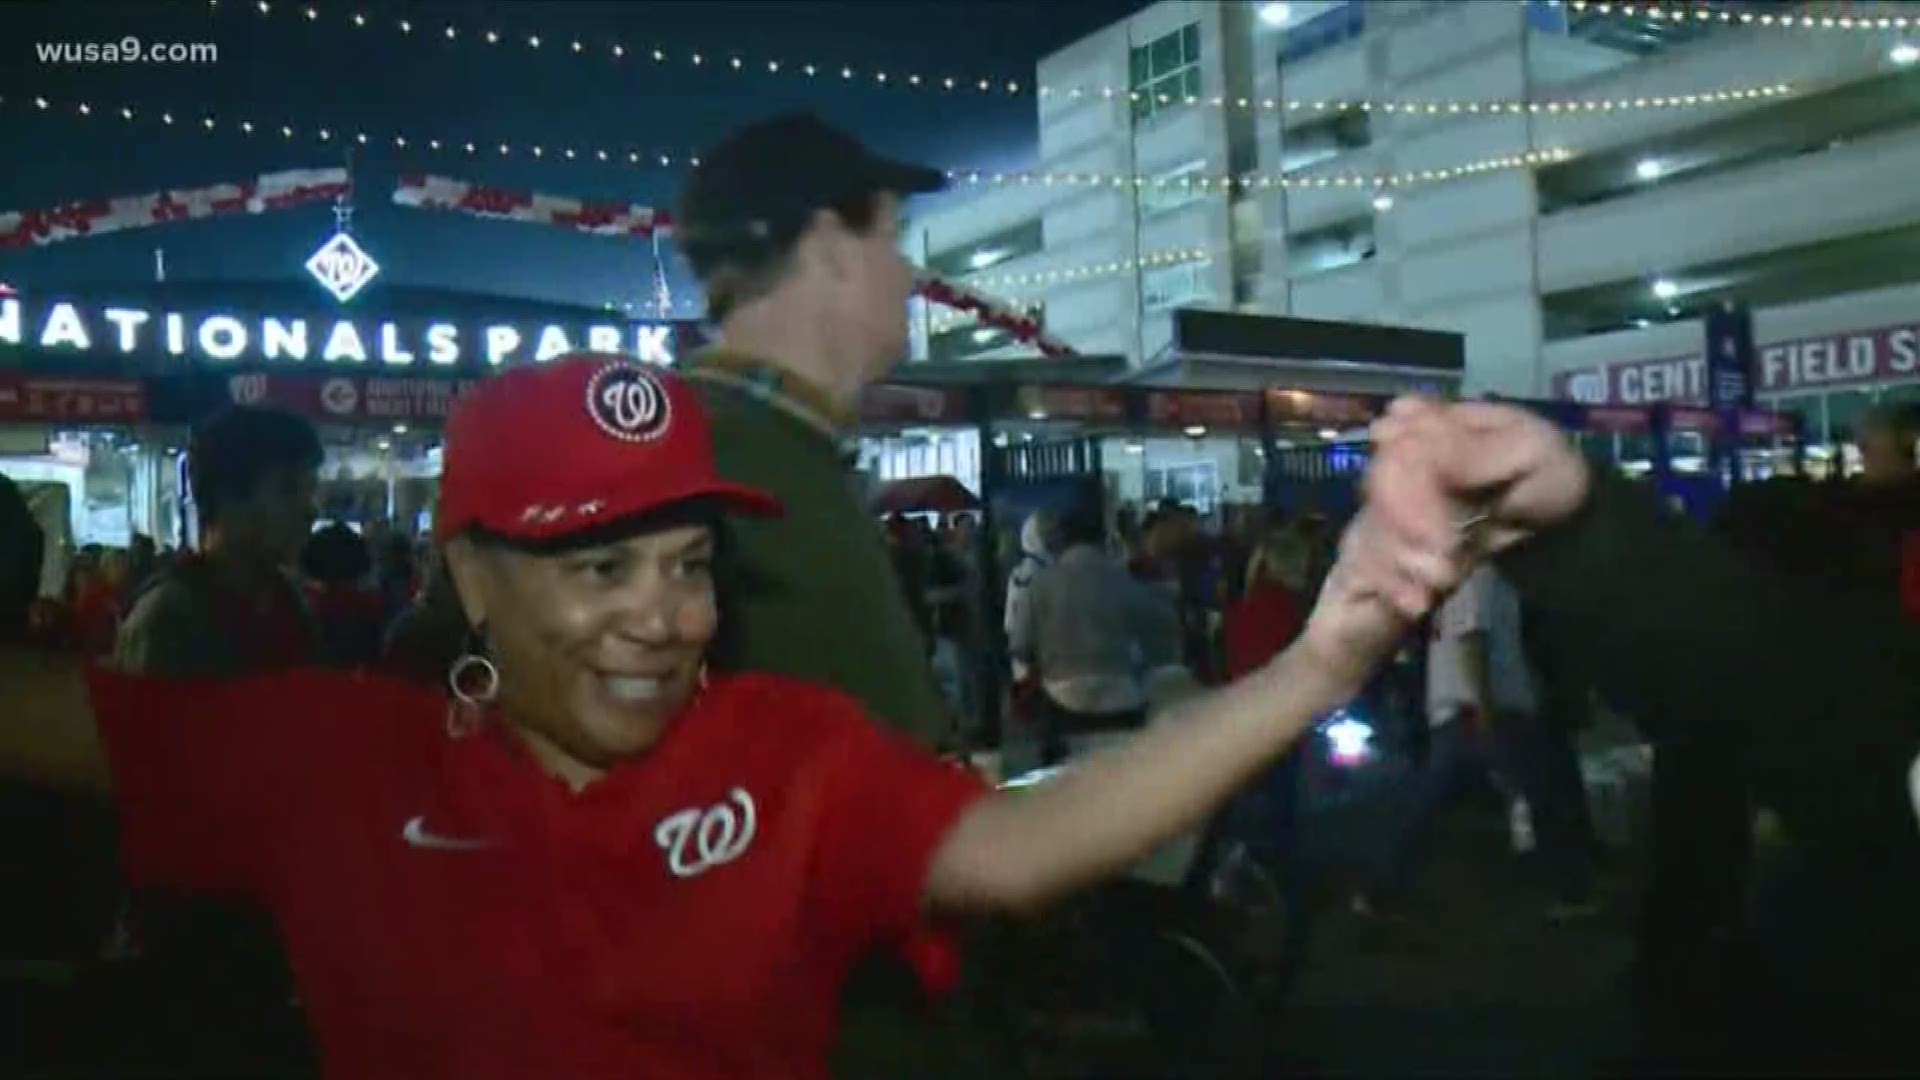 The Washington Nationals are going to the World Series and fans celebrated outside Nationals Park.